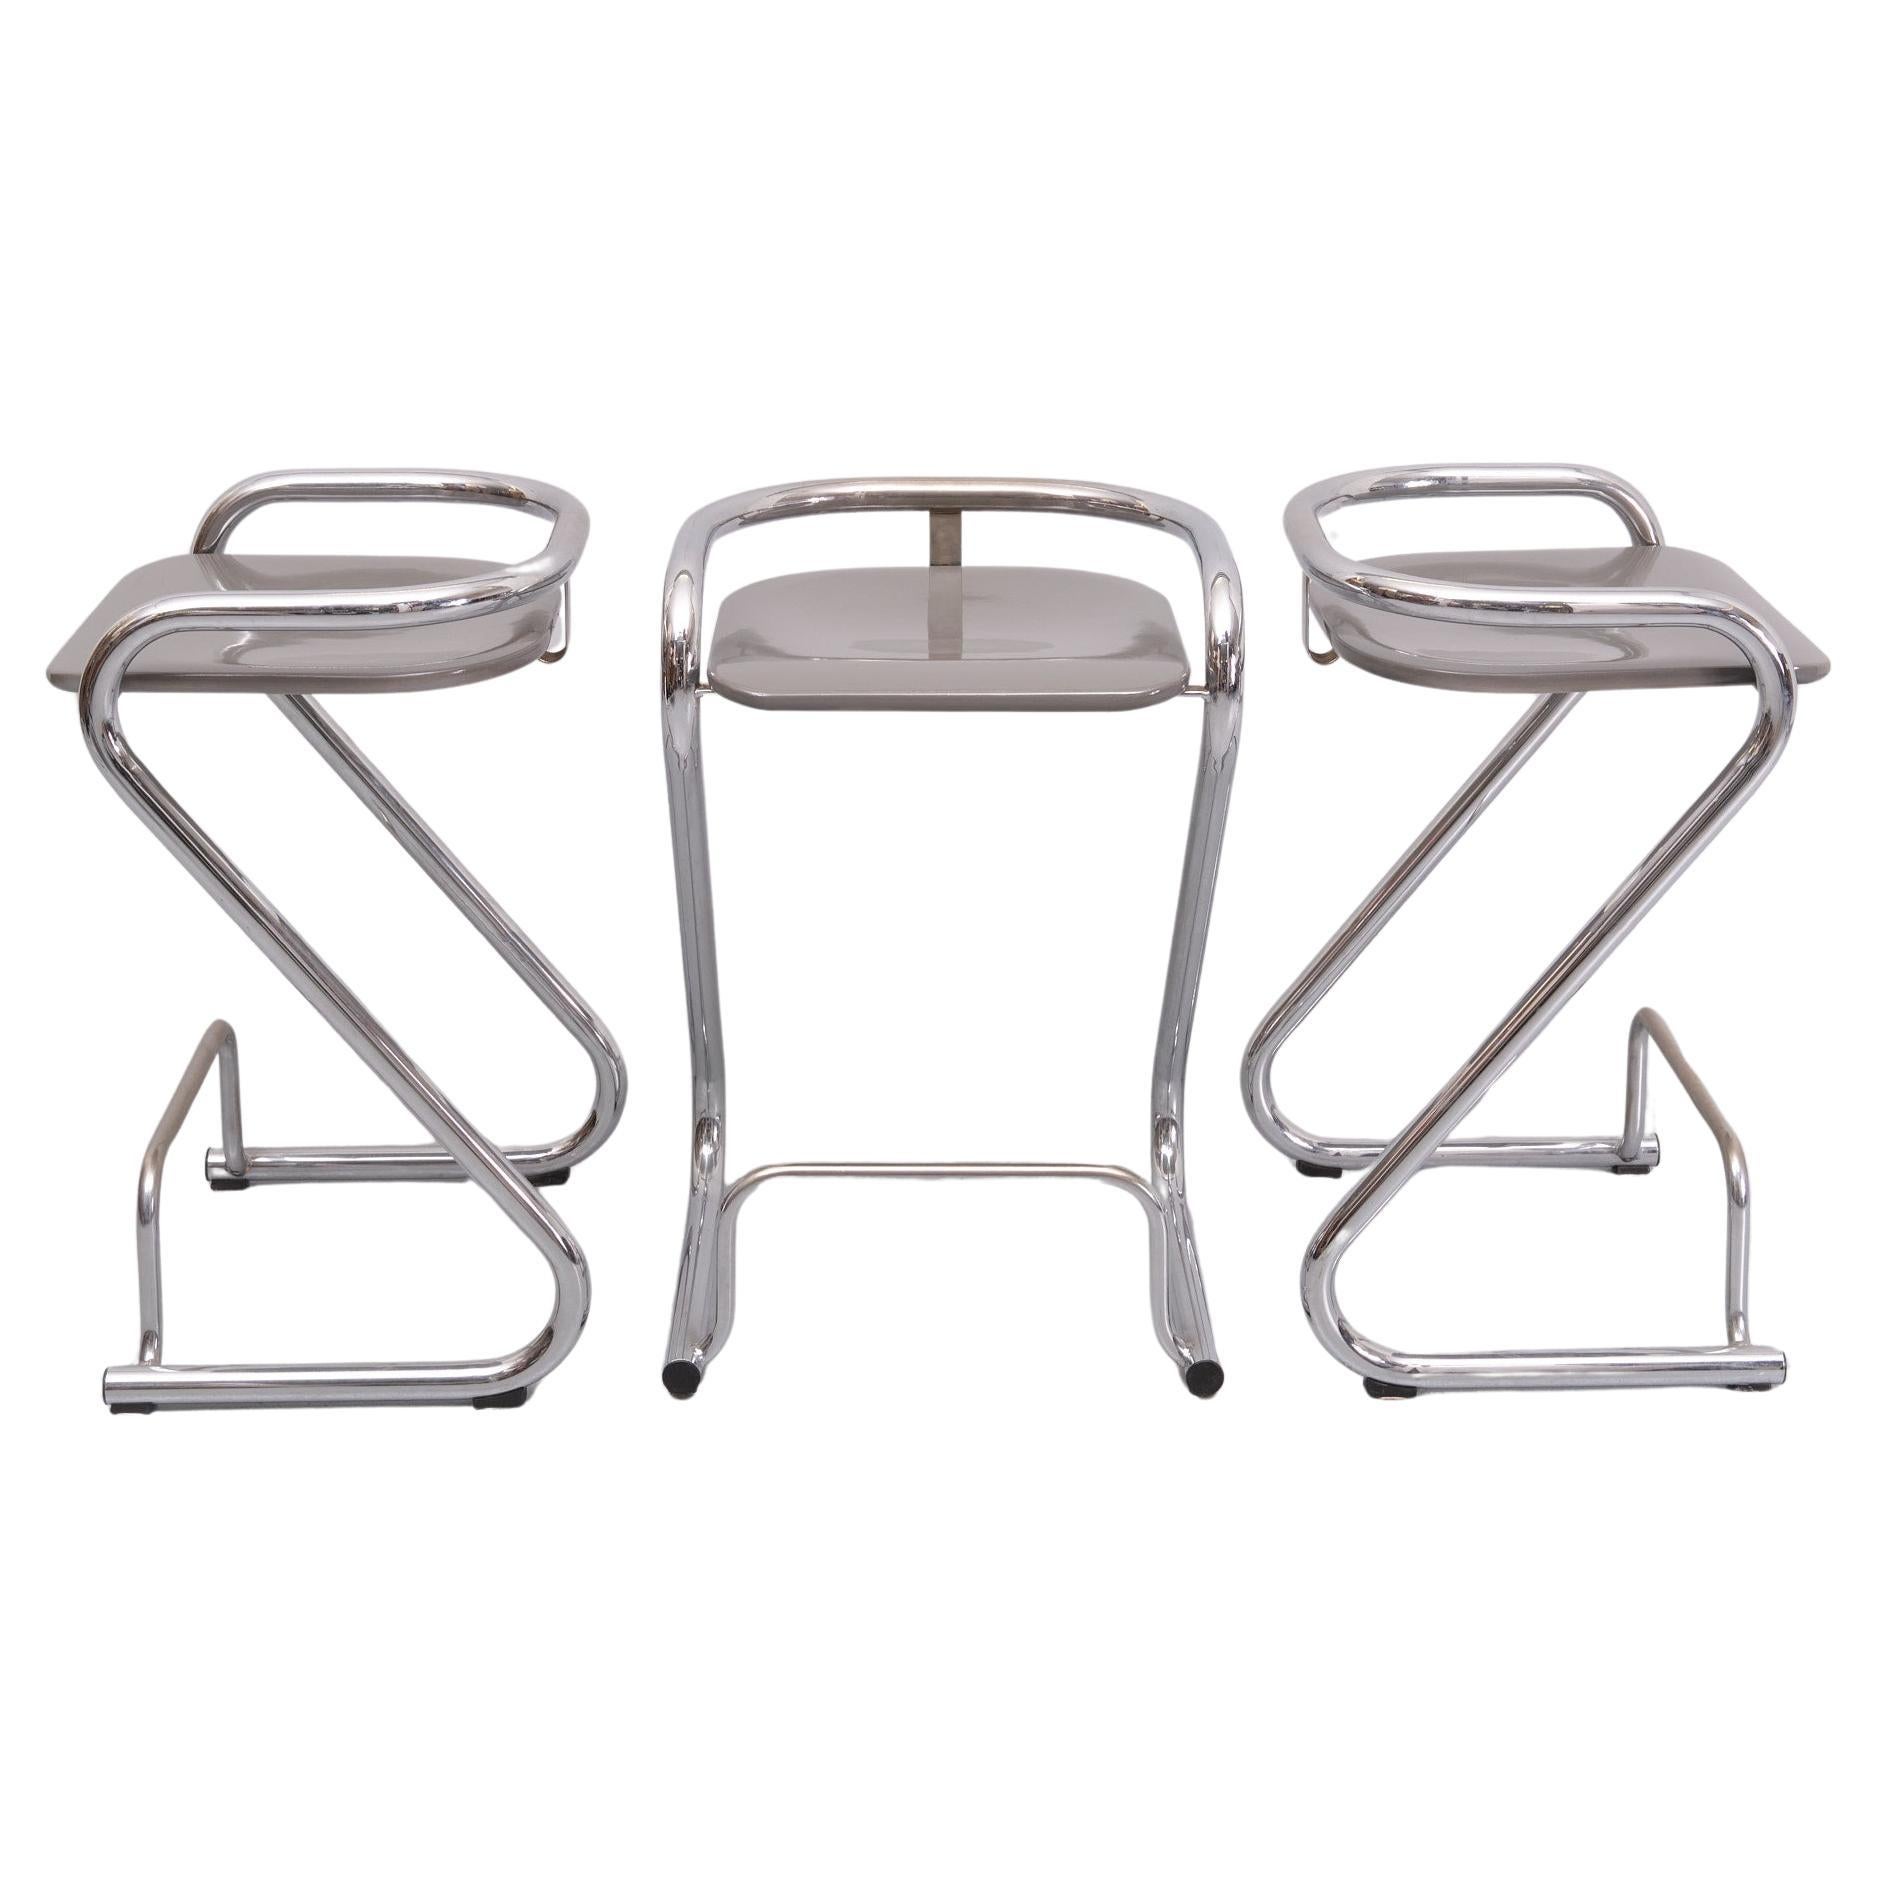 Mid-20th Century Set of 3 Bar stools S70-3 by Borge Lindau & Bo Lindekrantz for Lammhults  1960  For Sale